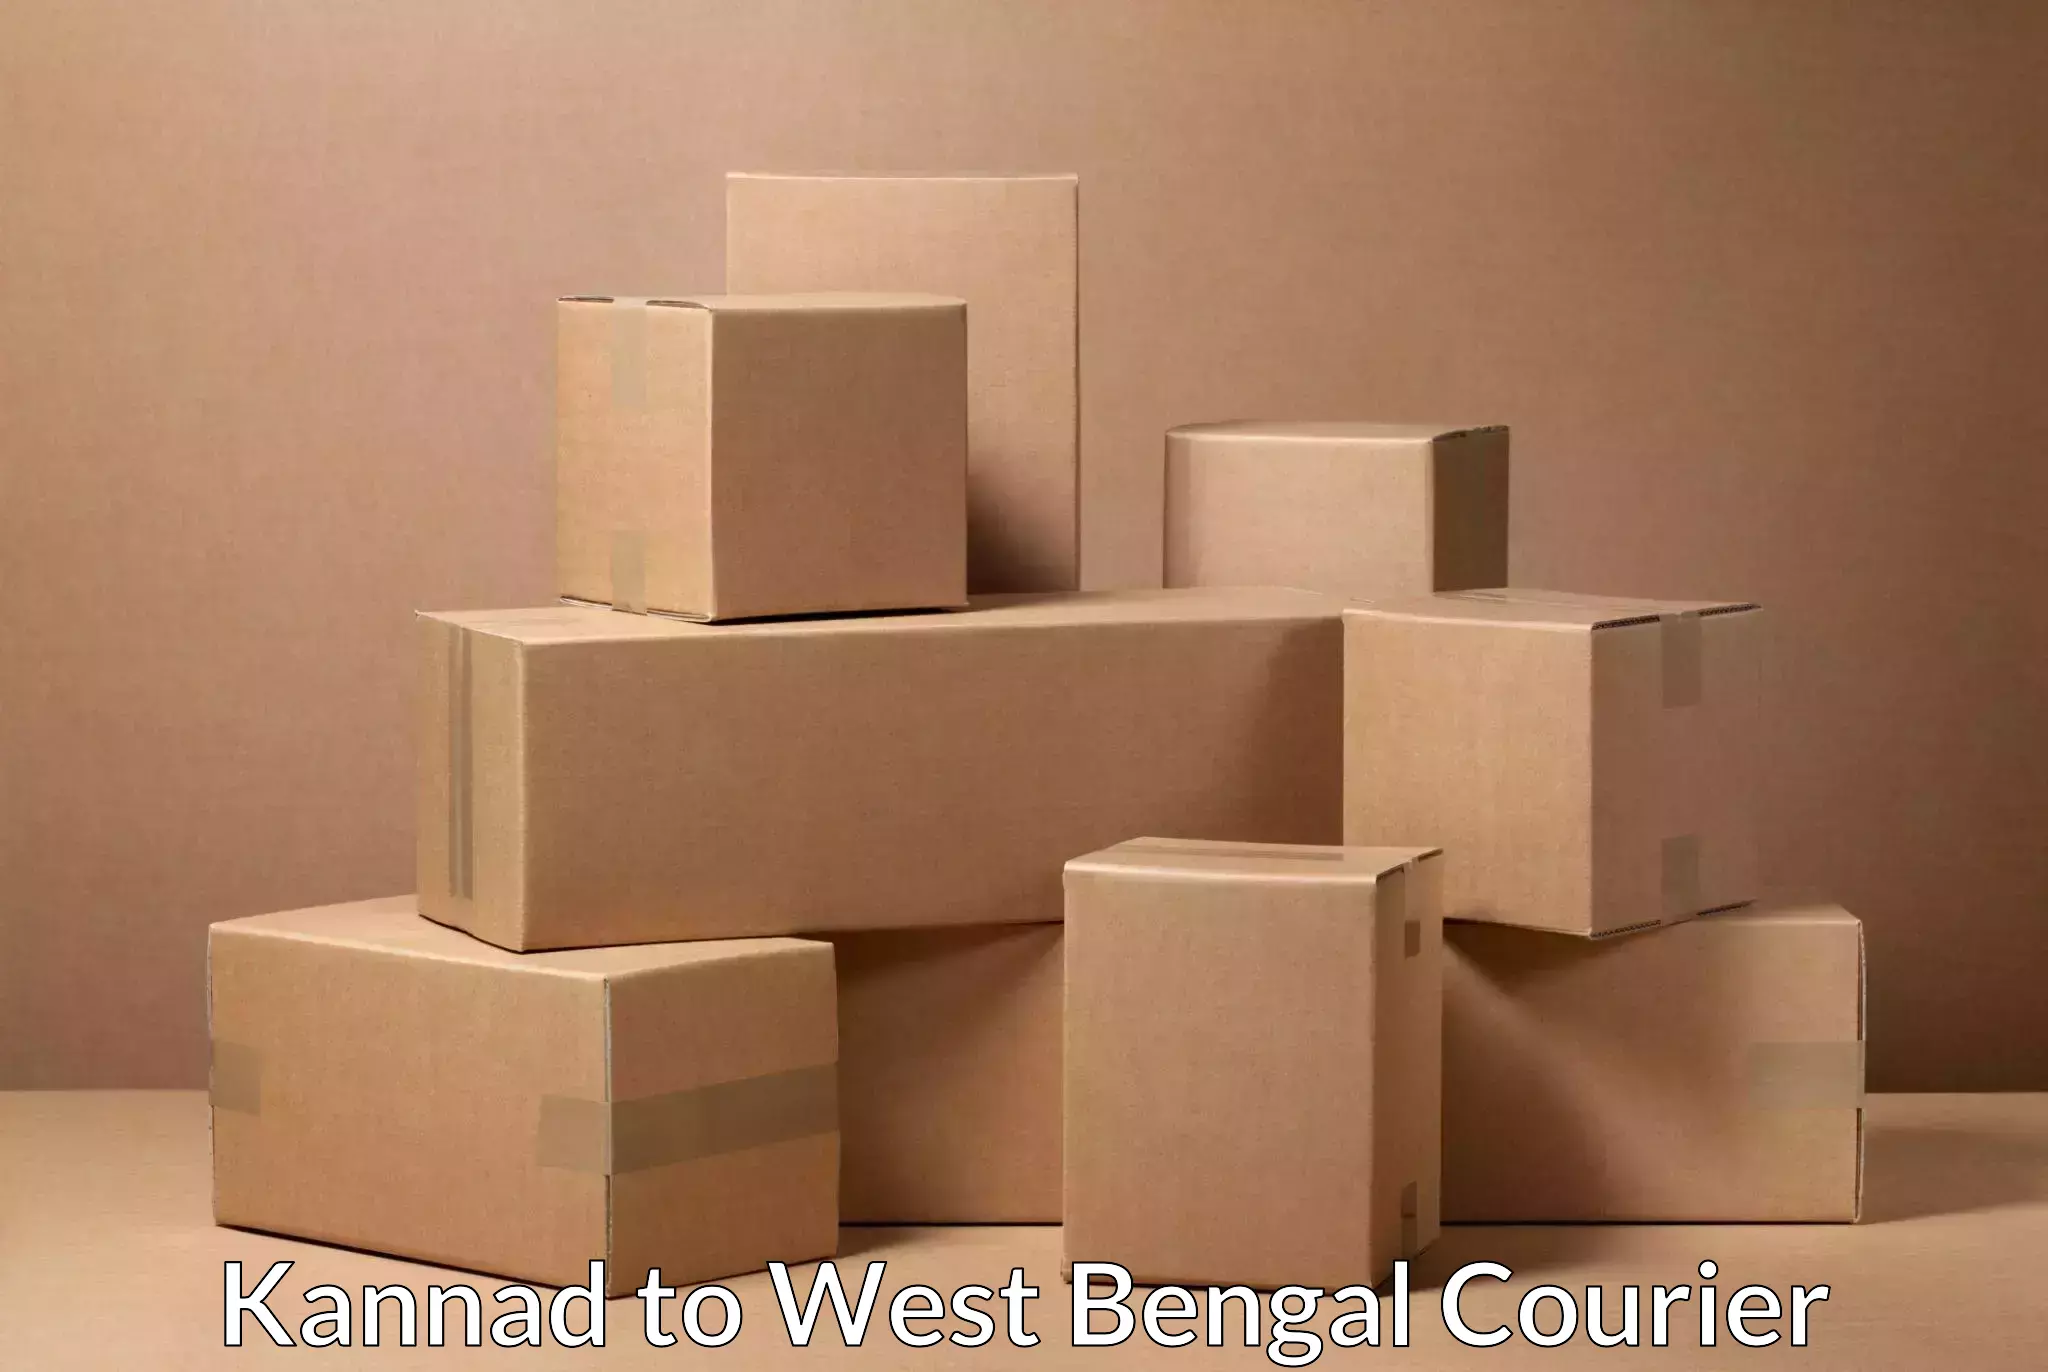 Residential courier service in Kannad to Serampore